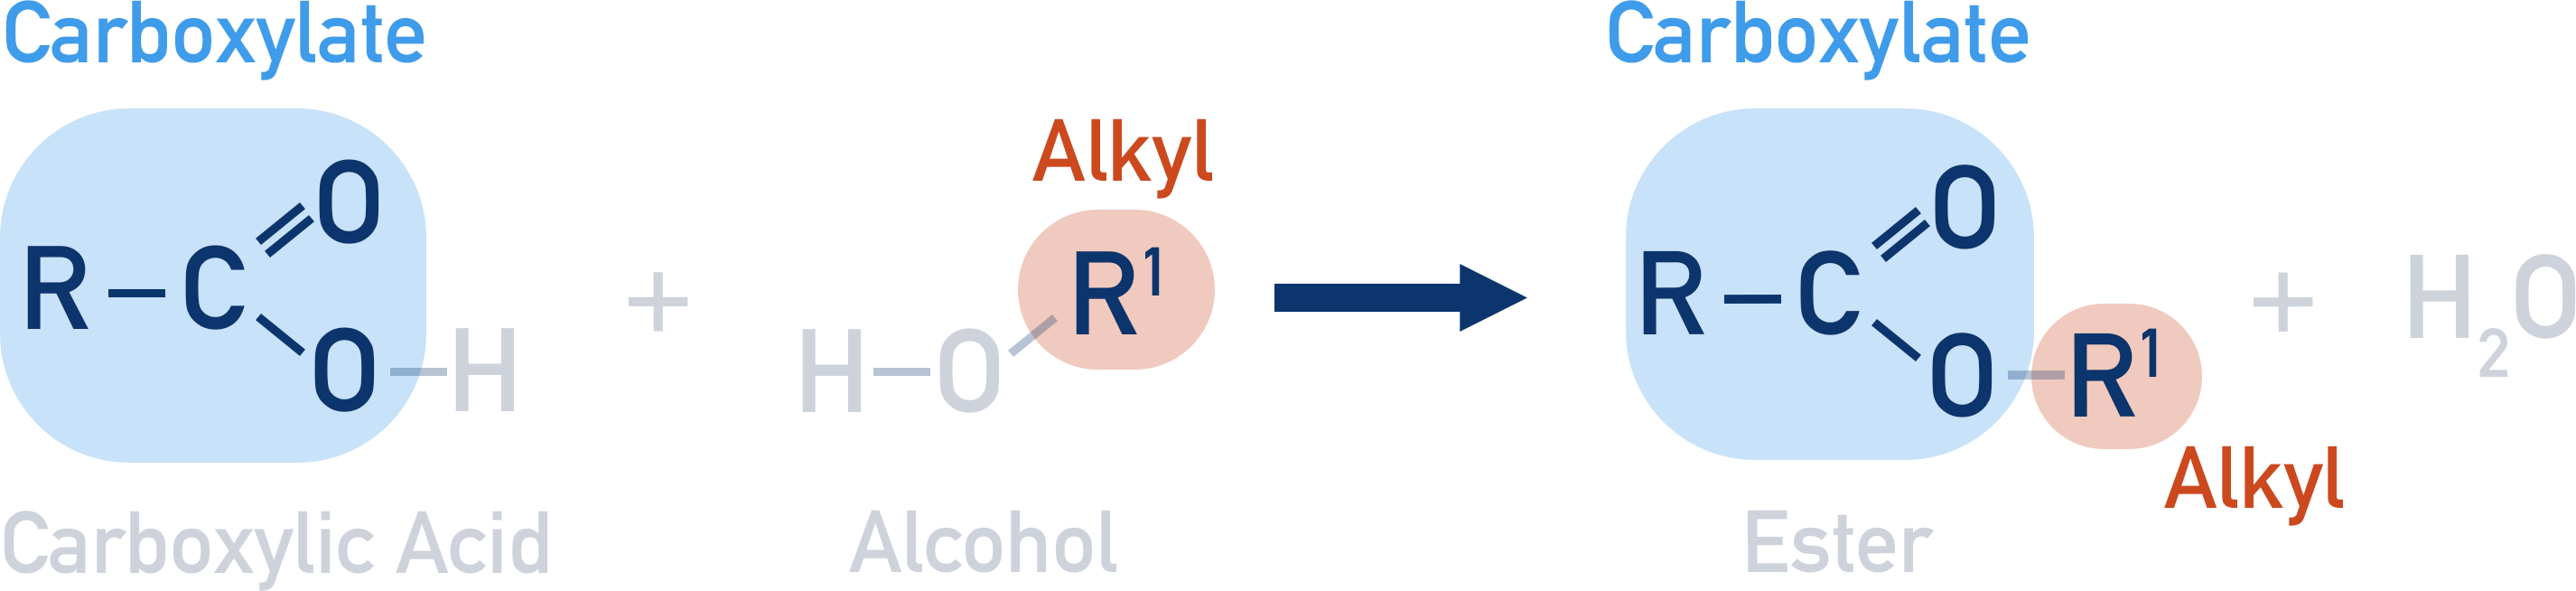 how to name esters carboxylate alkyl